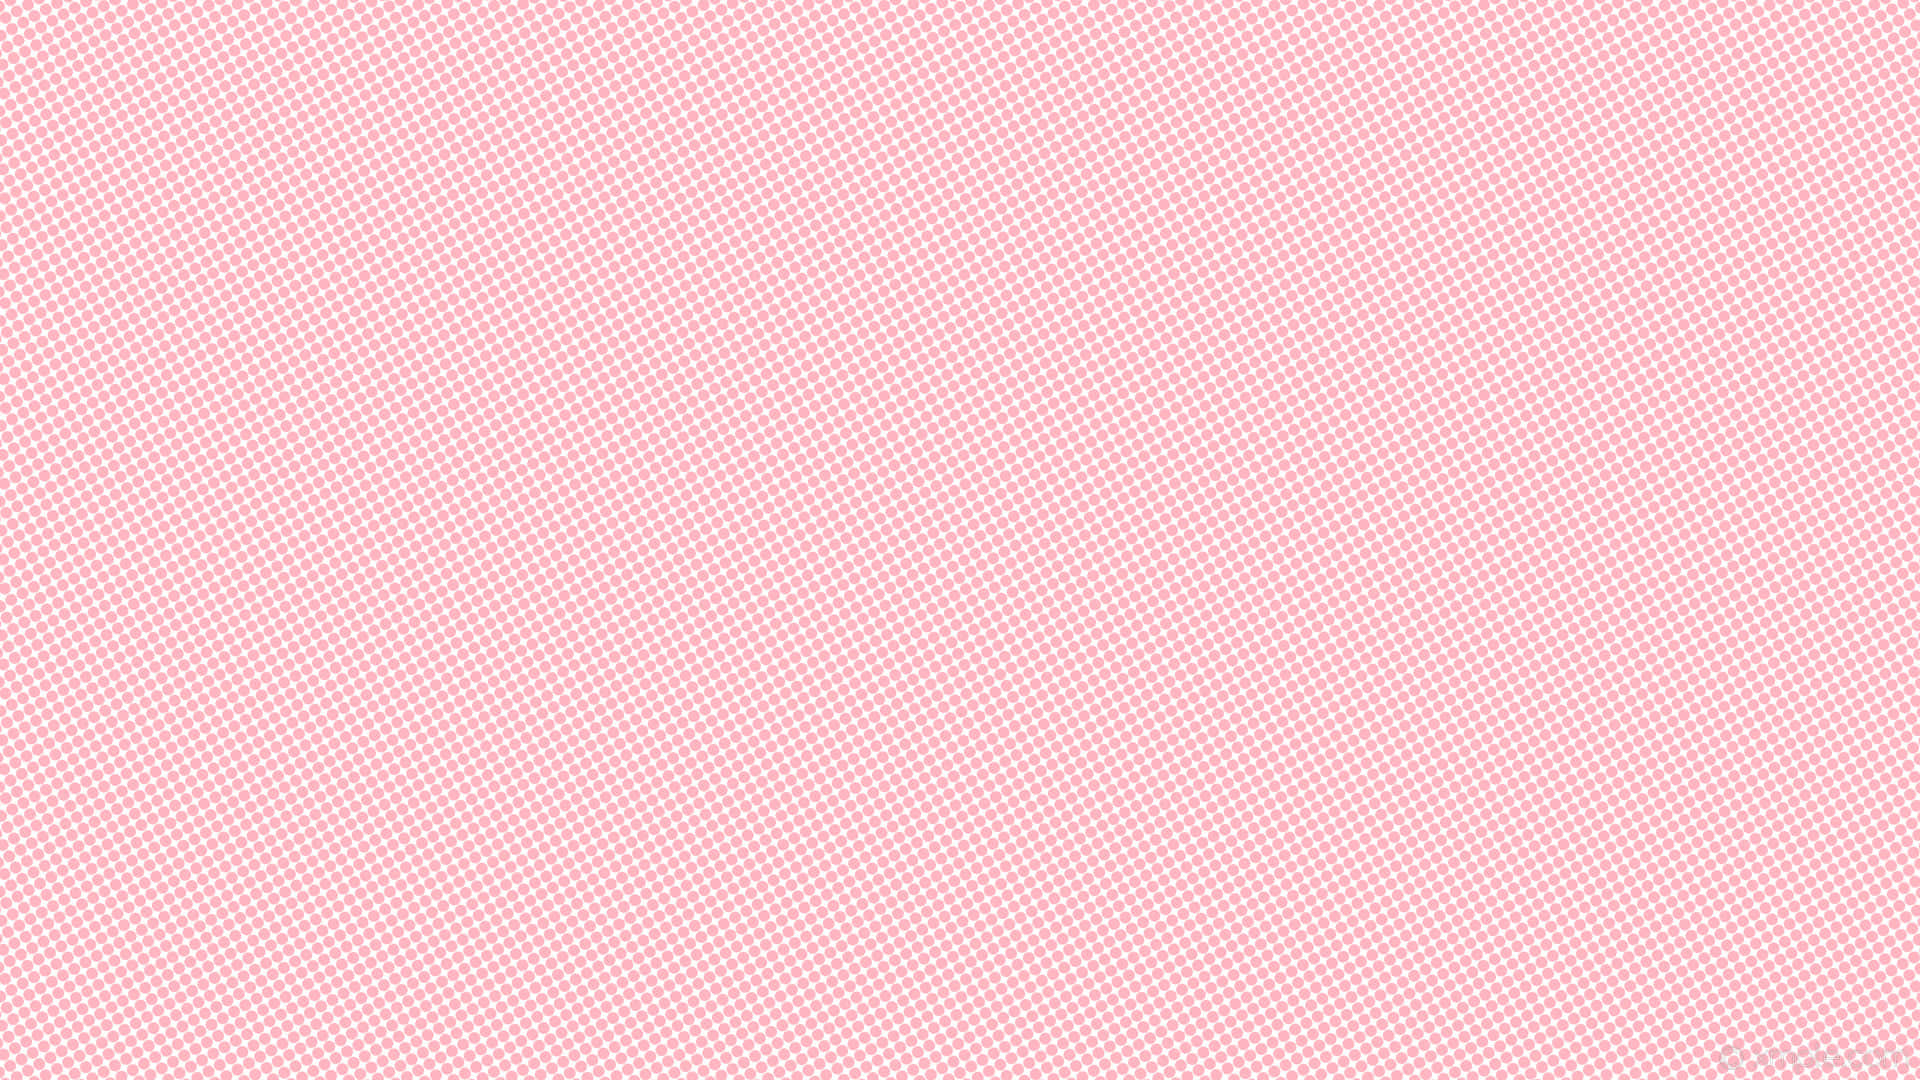 Free Solid Pink Wallpaper Downloads, [100+] Solid Pink Wallpapers ...